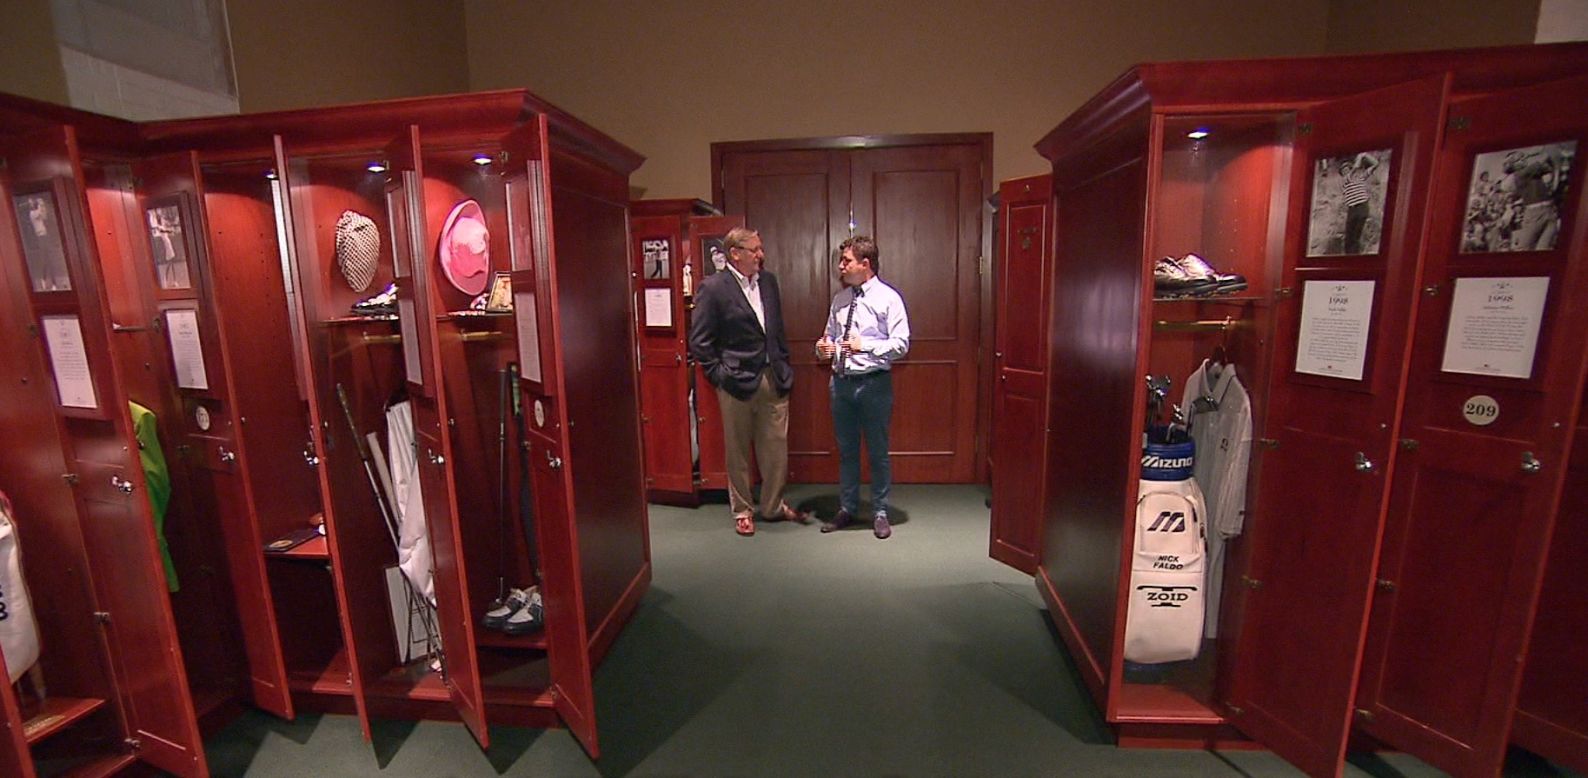 Hall of Fame chief operating offer Jack Peter shows CNN Living Golf's Shane O'Donoghue the Hall of Fame locker room.